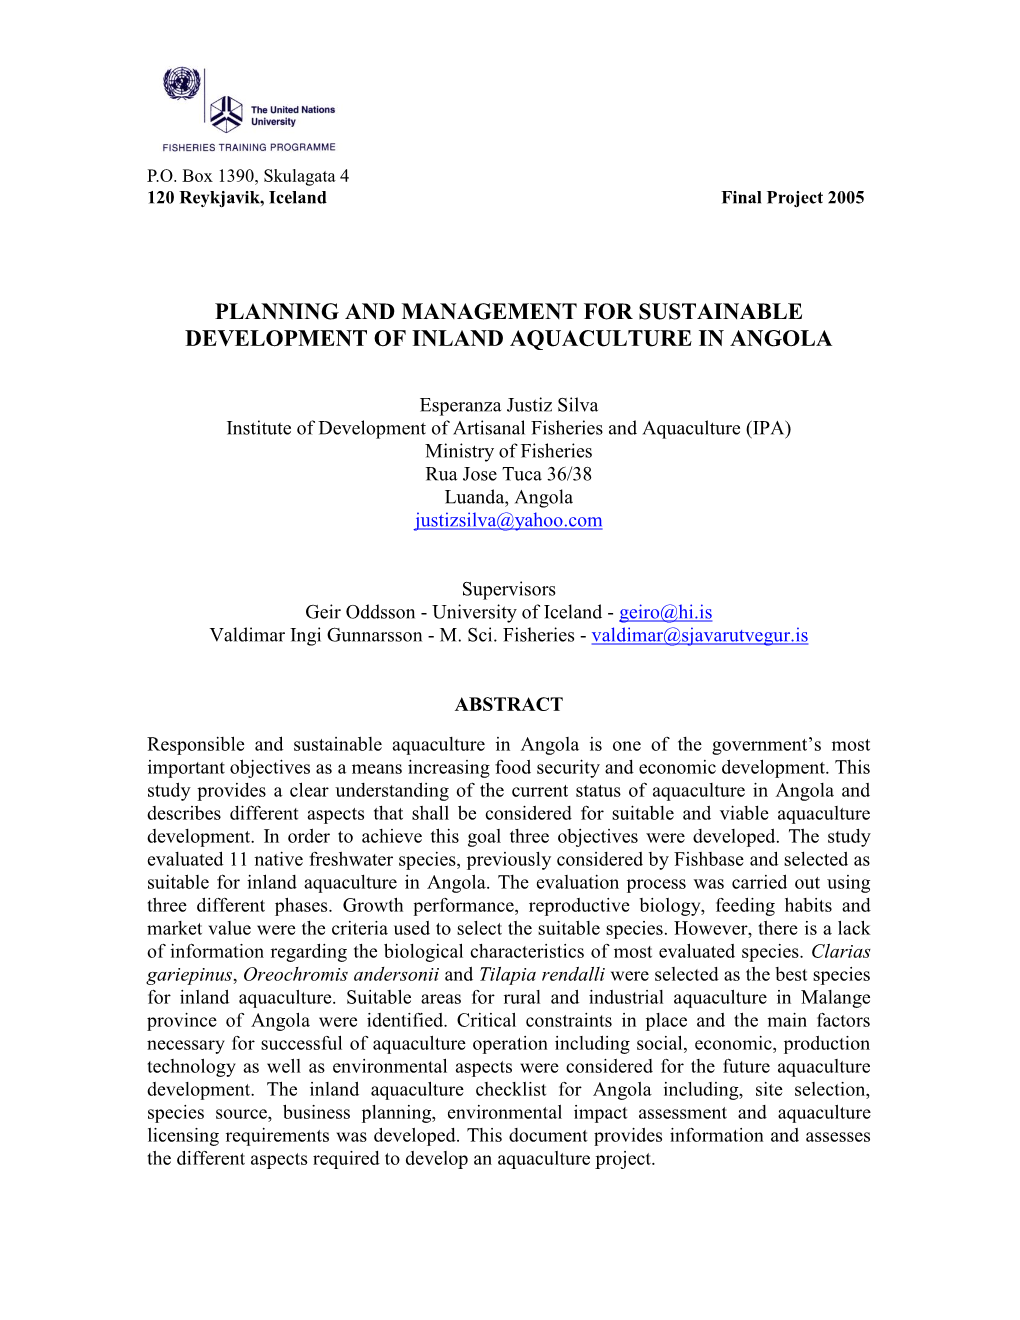 Planning and Management for Sustainable Development of Inland Aquaculture in Angola